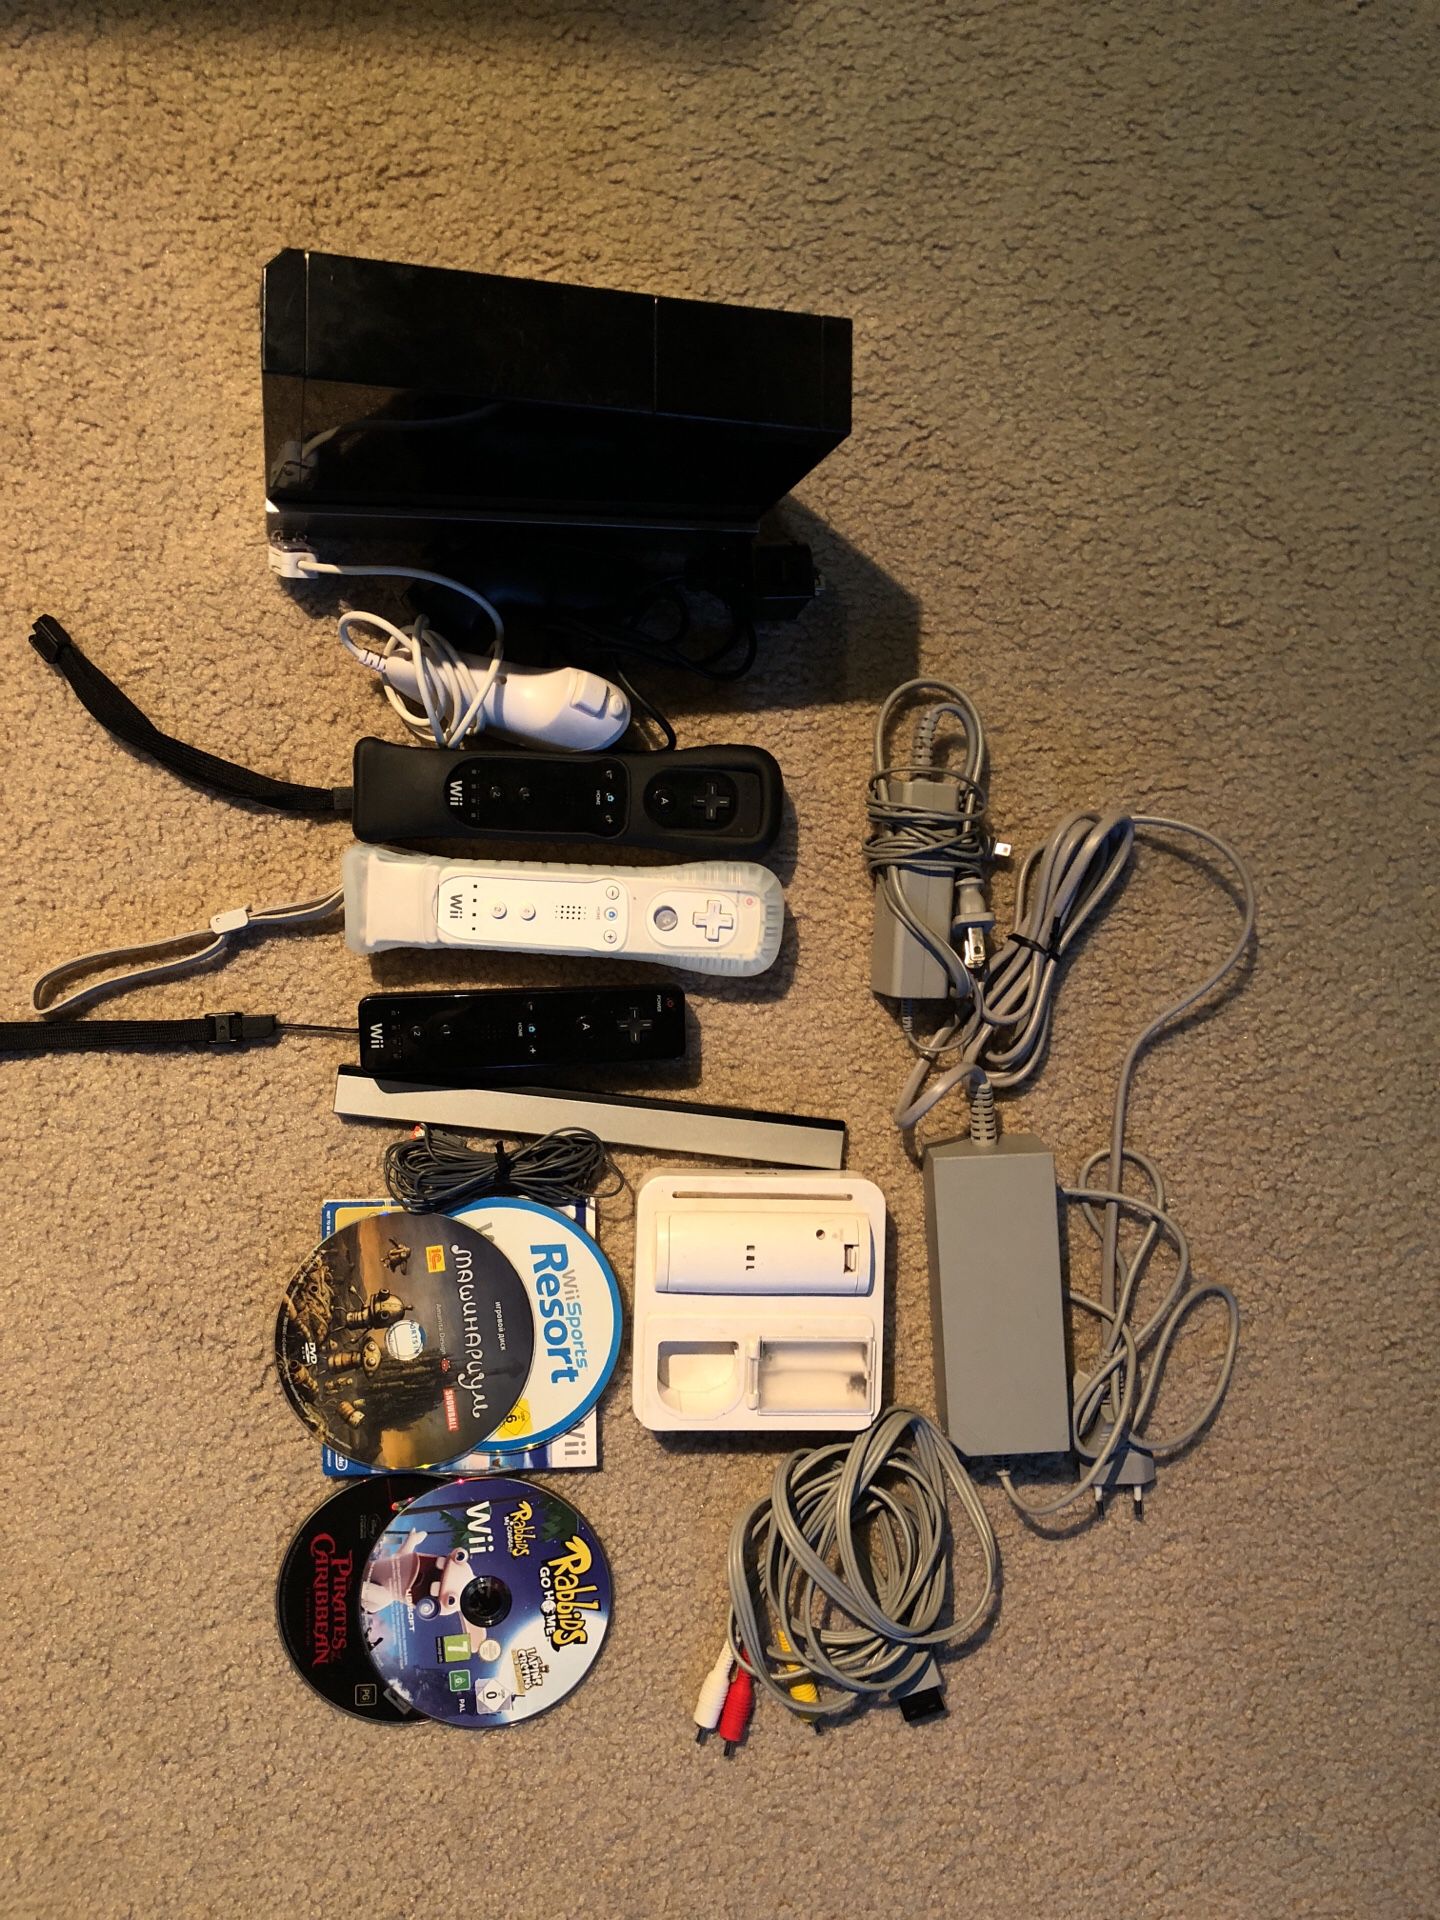 Wii console, accessories and games